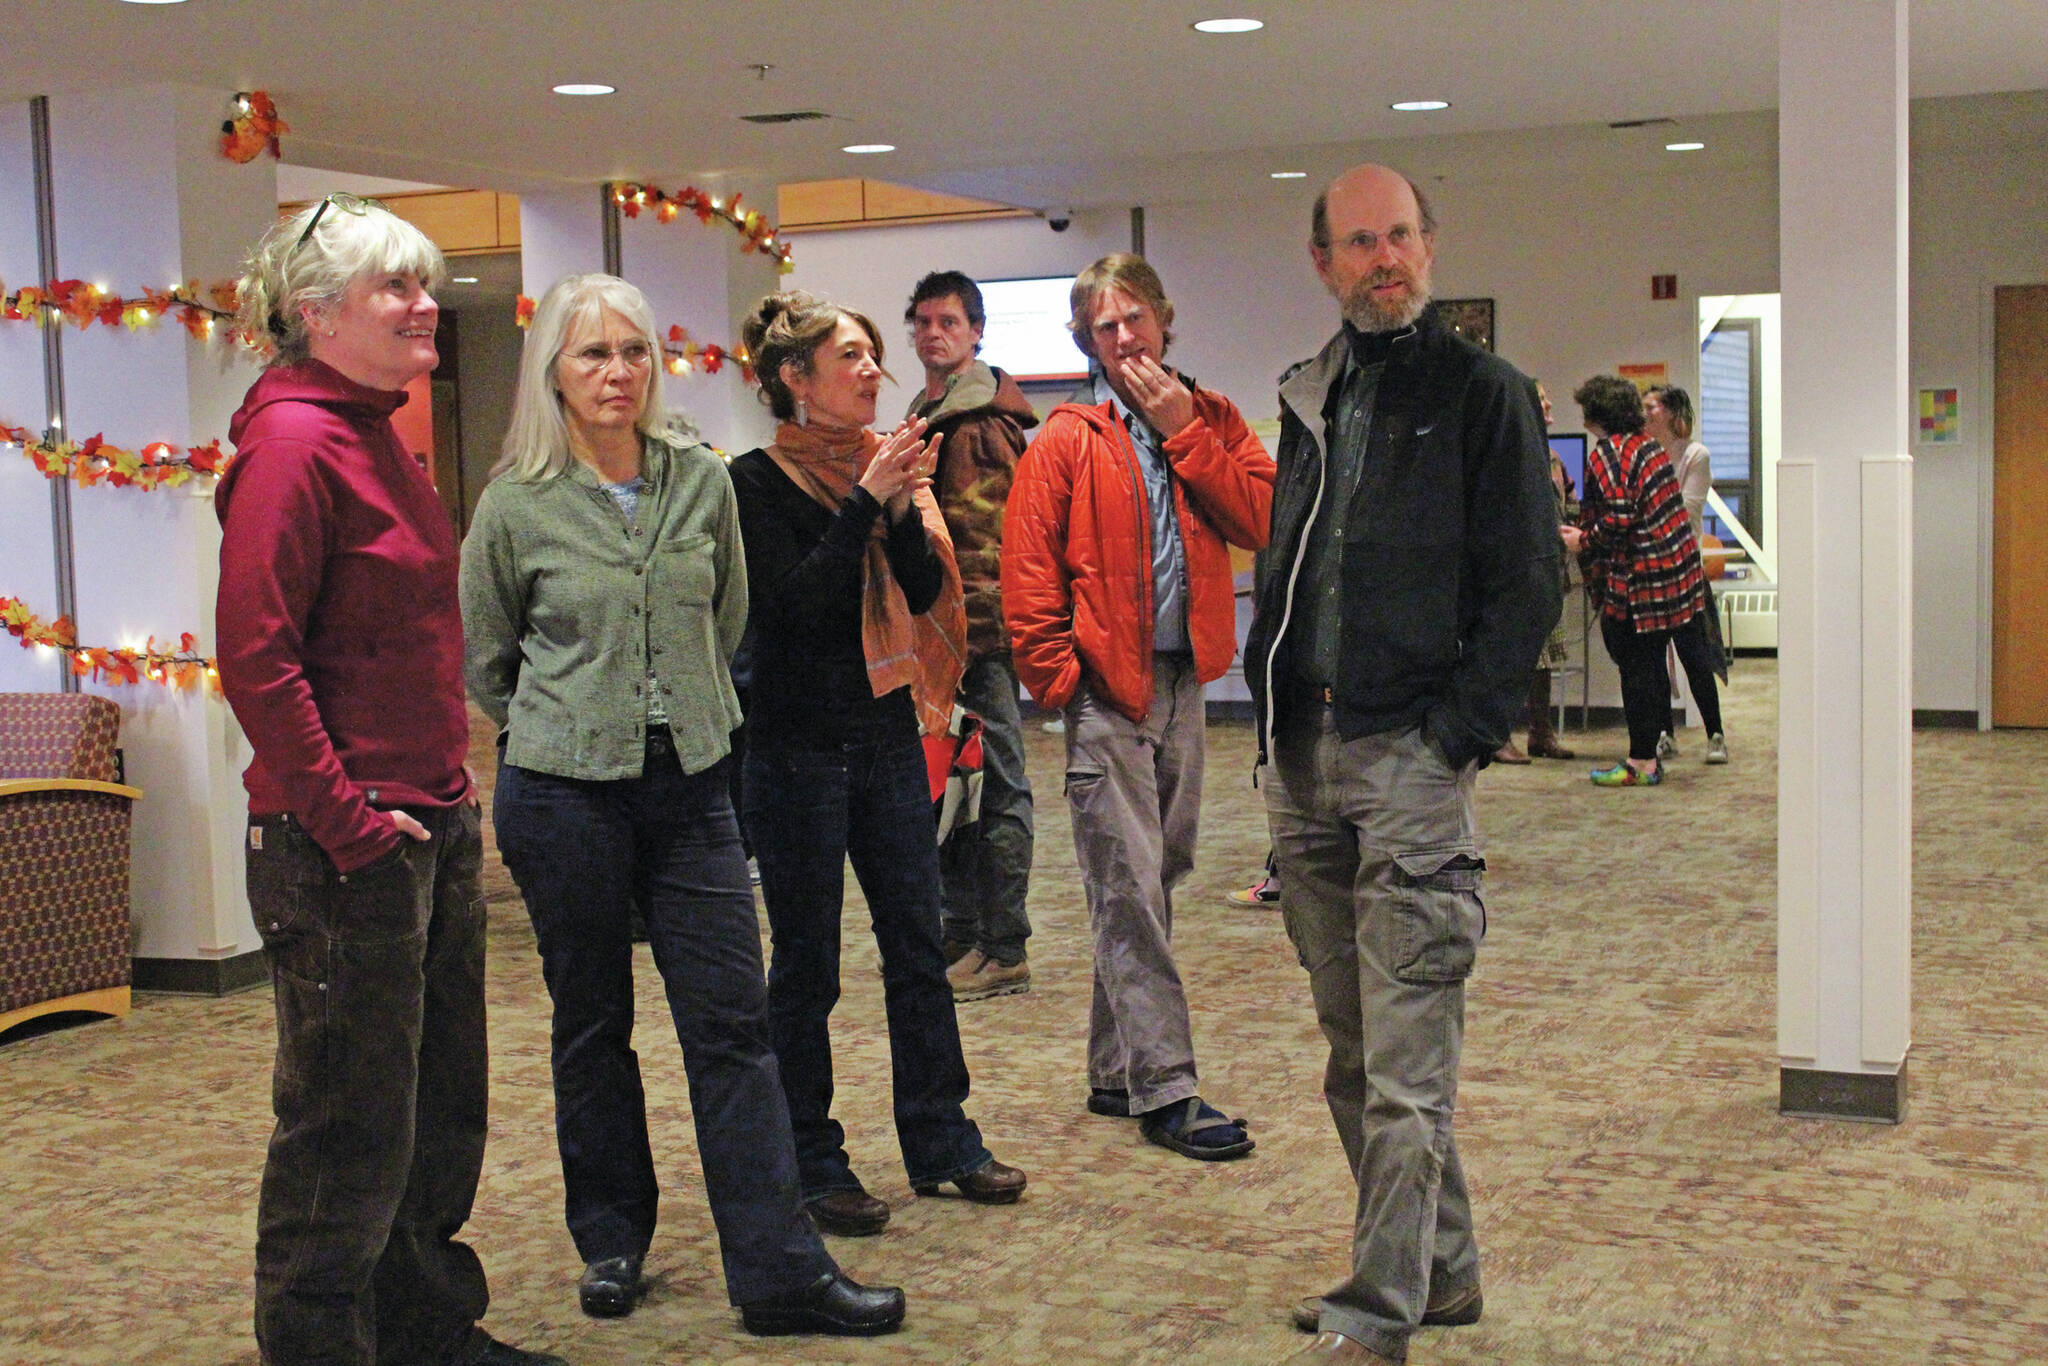 Artist Asia Freeman, third from left, speaks to visitors at a First Friday art exhibit opening featuring pieces by students in a college class she teaches, on Friday, Nov. 1, 2019, at Kachemak Bay Campus in Homer. (Photo by Megan Pacer/Homer News)